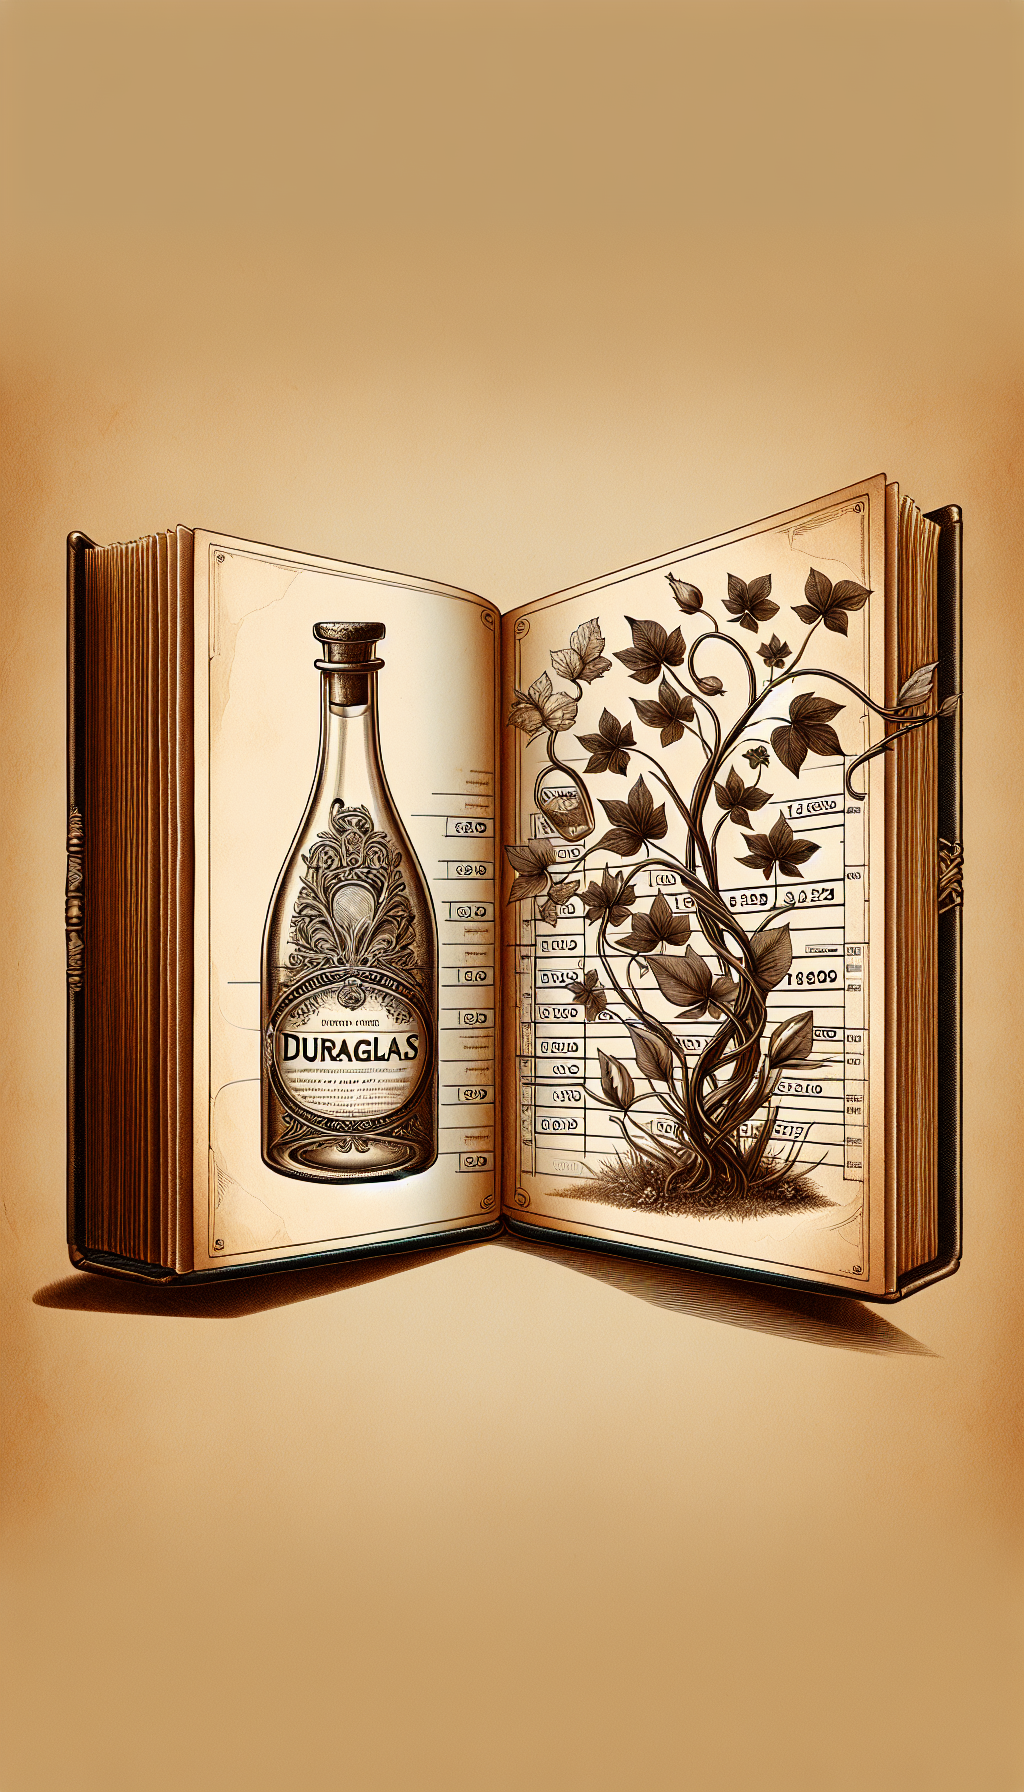 An illustration features an open antique book with sepia-toned pages, one showing a detailed sketch of a Duraglas bottle and the other a timeline fading into its silhouette. Intricate vines entwine the bottle, with some leaves morphing into price tags to signify varying values. The vintage paper texture and classic botanical illustration style add to the theme of historical elegance.